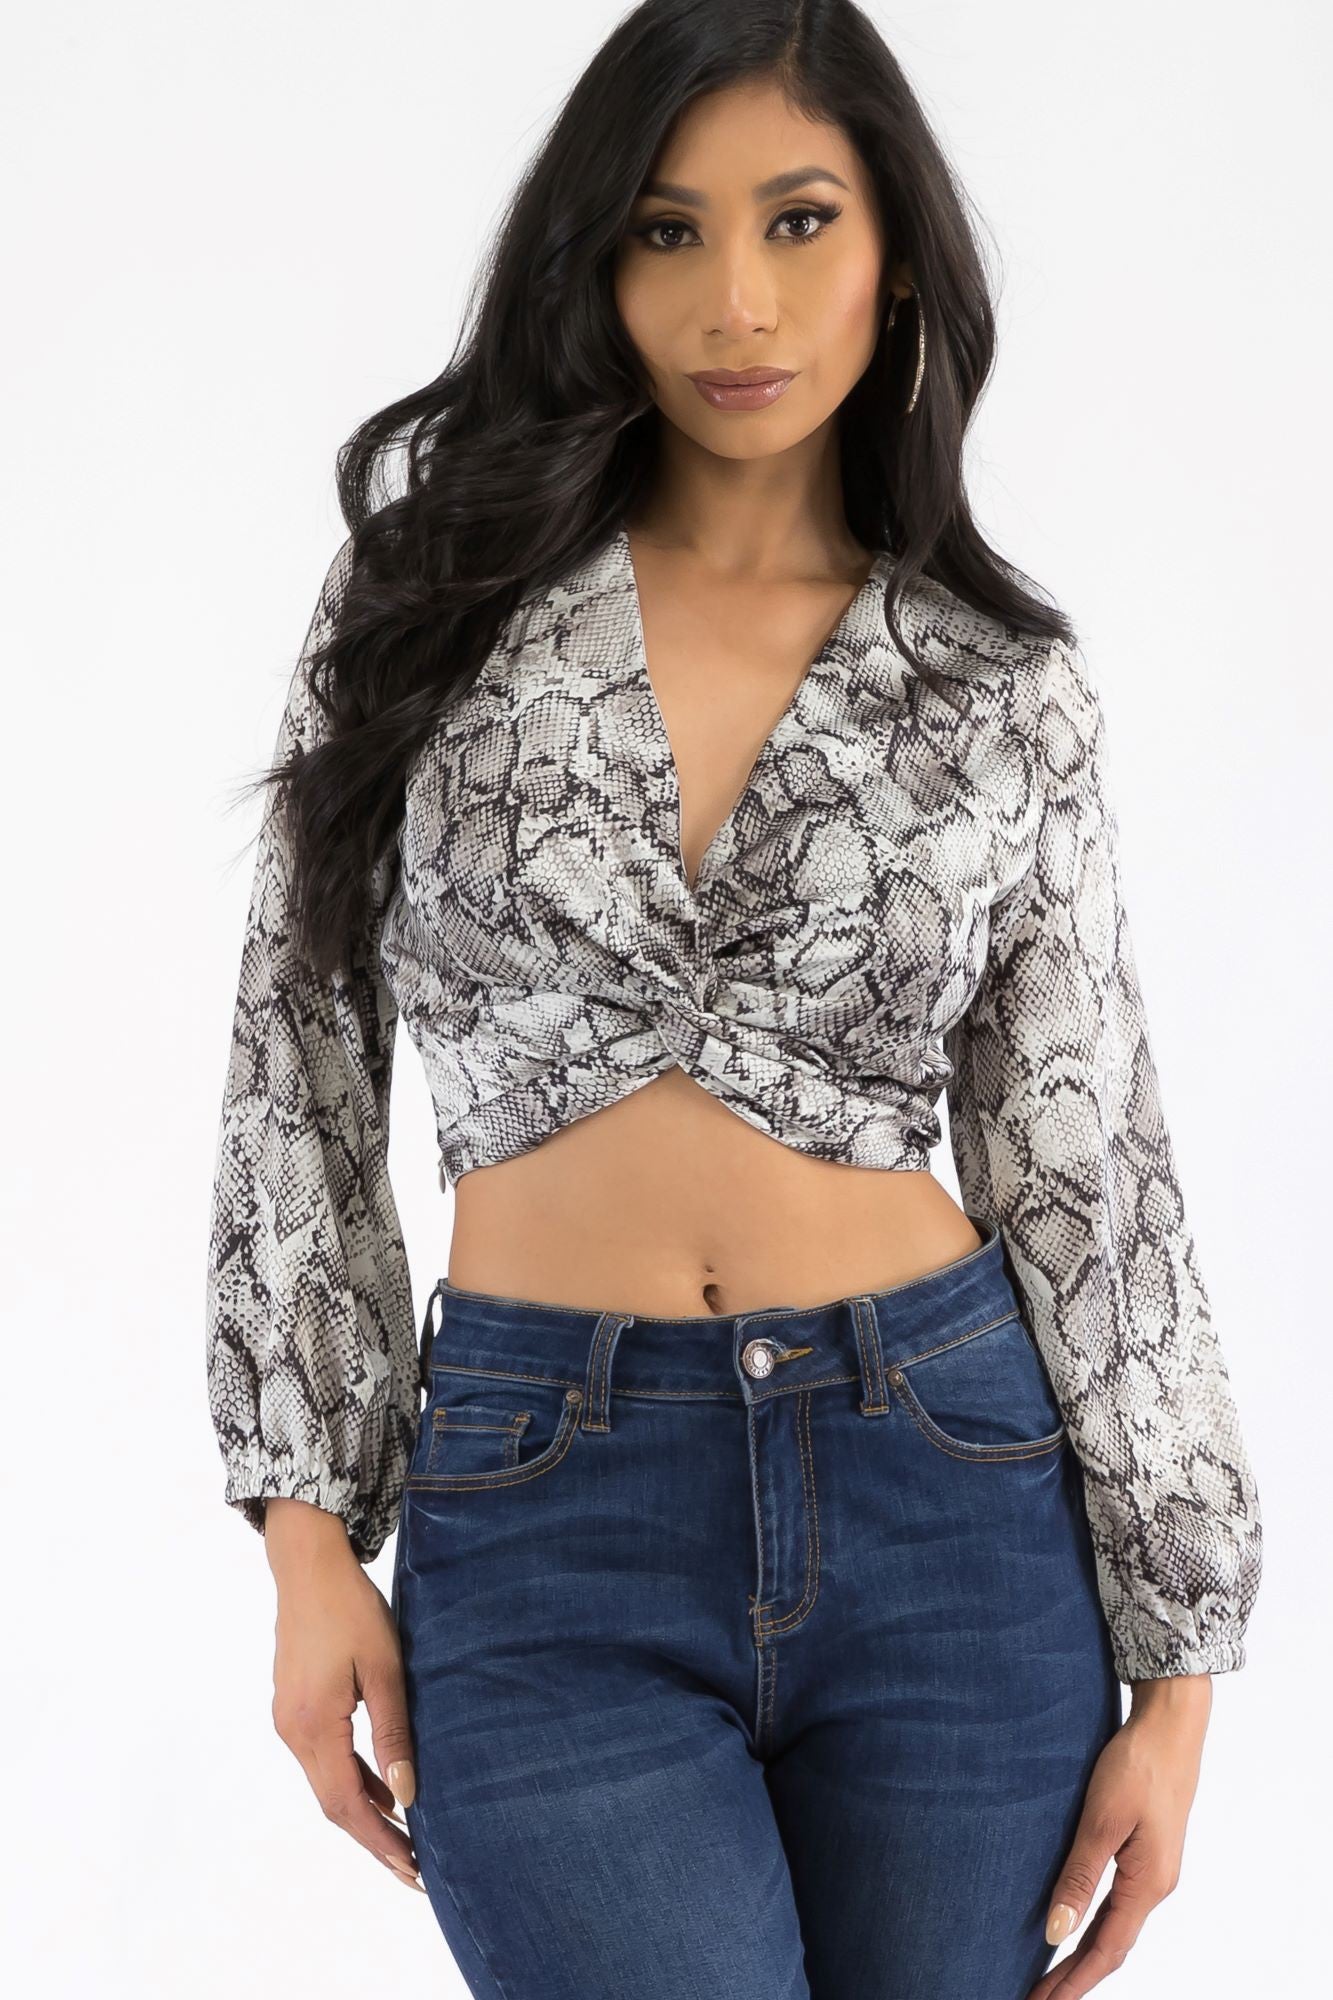 LST0006 - SATIN SNAKE PRINT LONG SLEEVE TWISTED FRONT